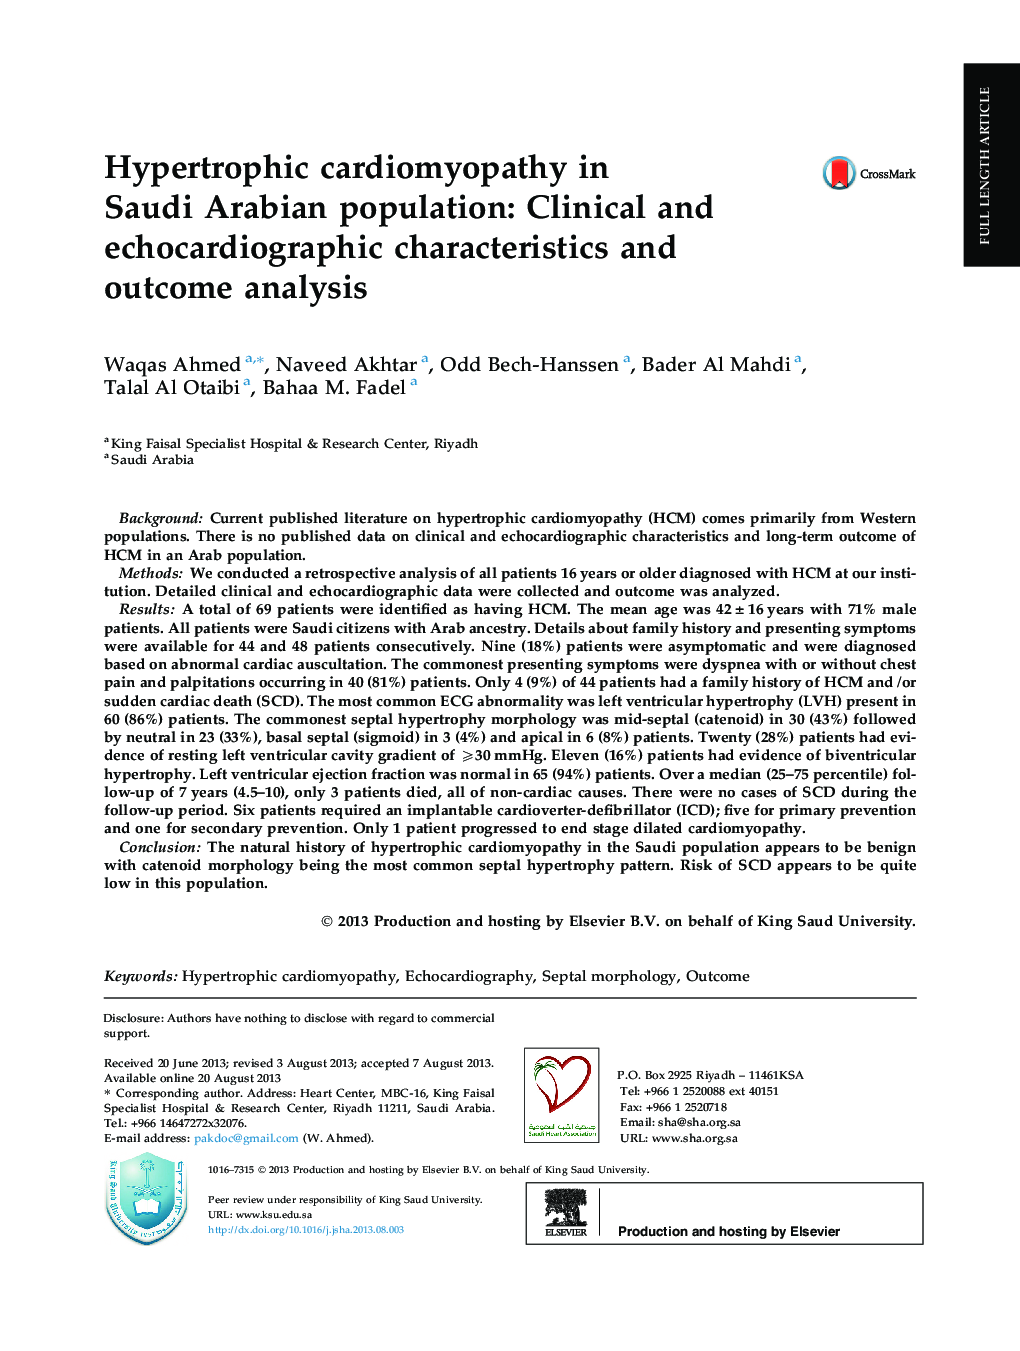 Hypertrophic cardiomyopathy in the Saudi Arabian population: Clinical and echocardiographic characteristics and outcome analysis 